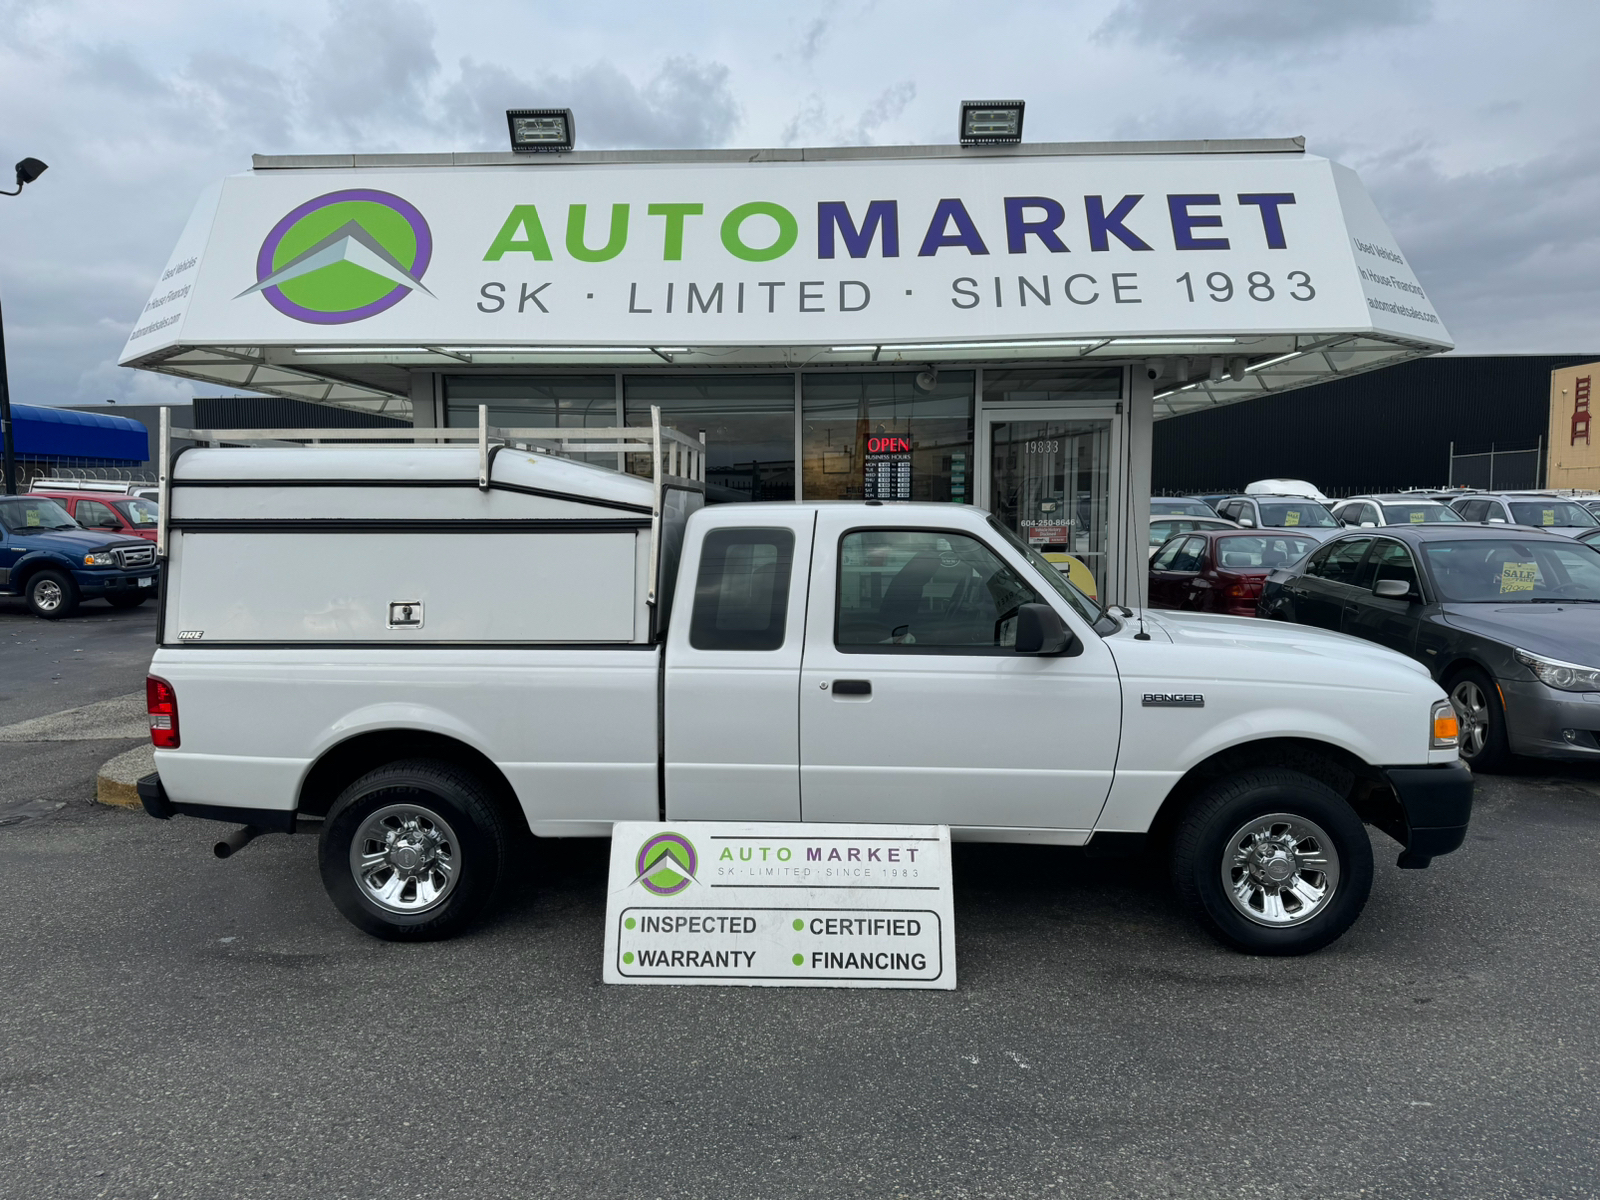 2008 Ford Ranger XLTONLY 64KM'S!! EXT CAB TRADESMAN CANOPY! INSPECT